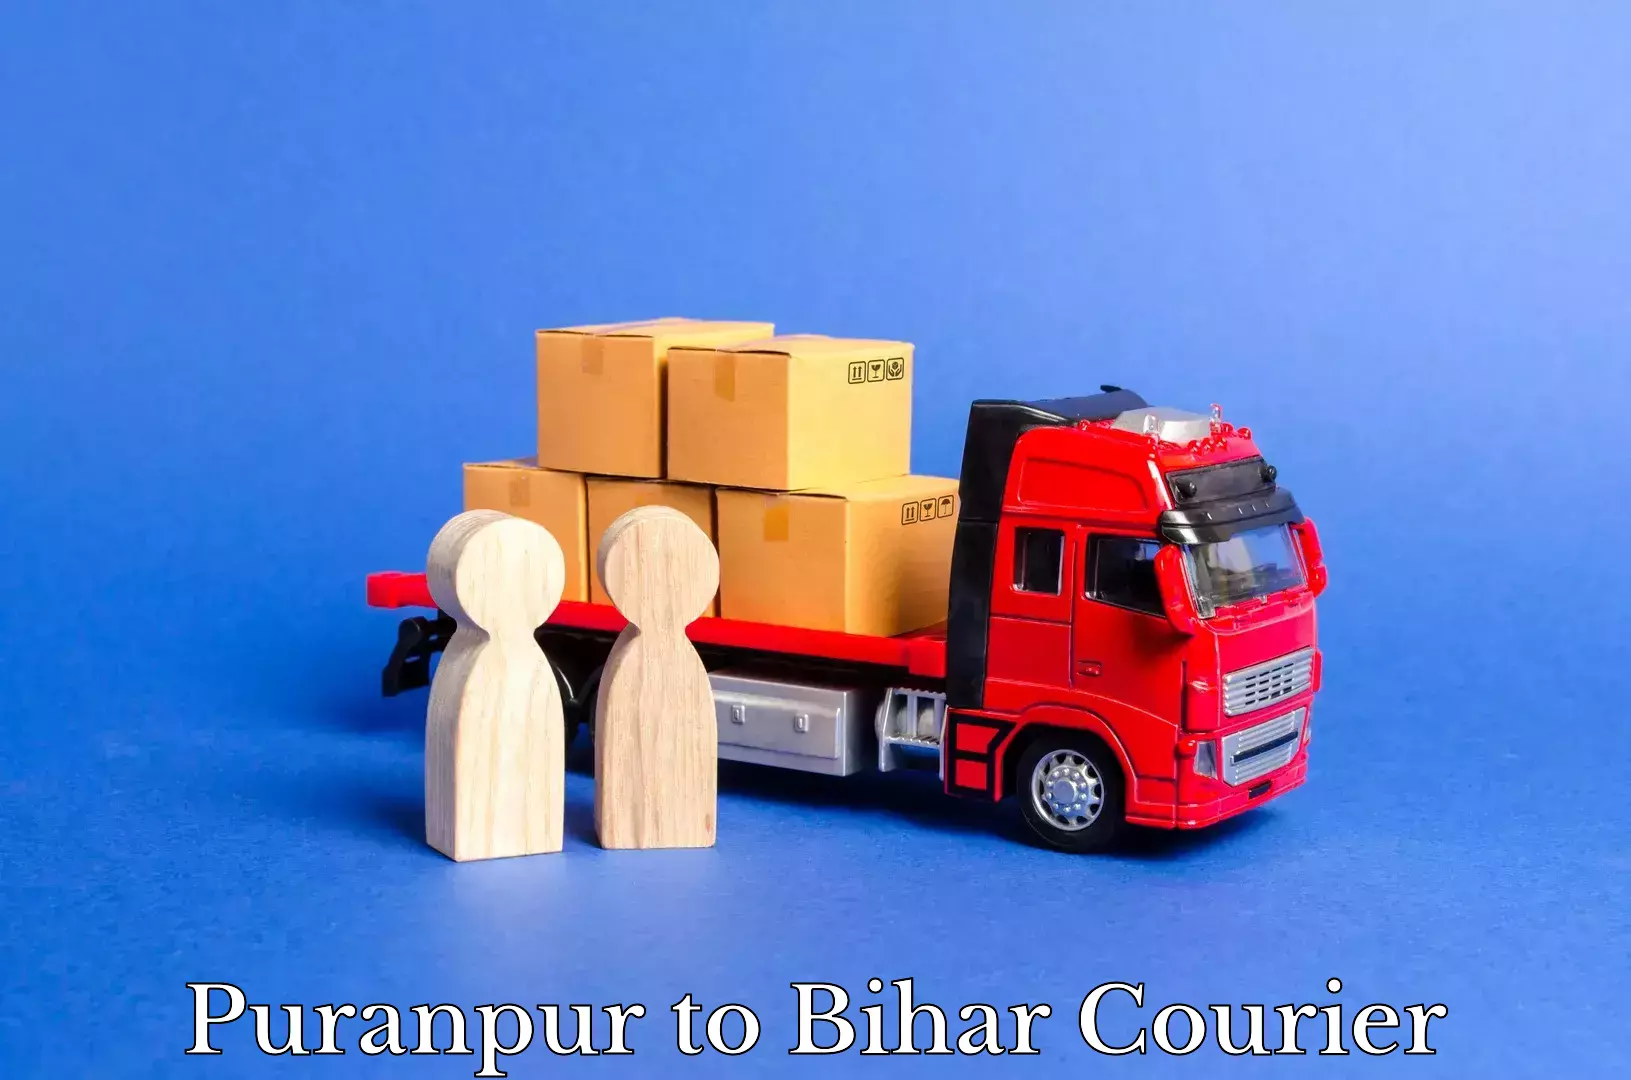 Express delivery capabilities Puranpur to Bihar